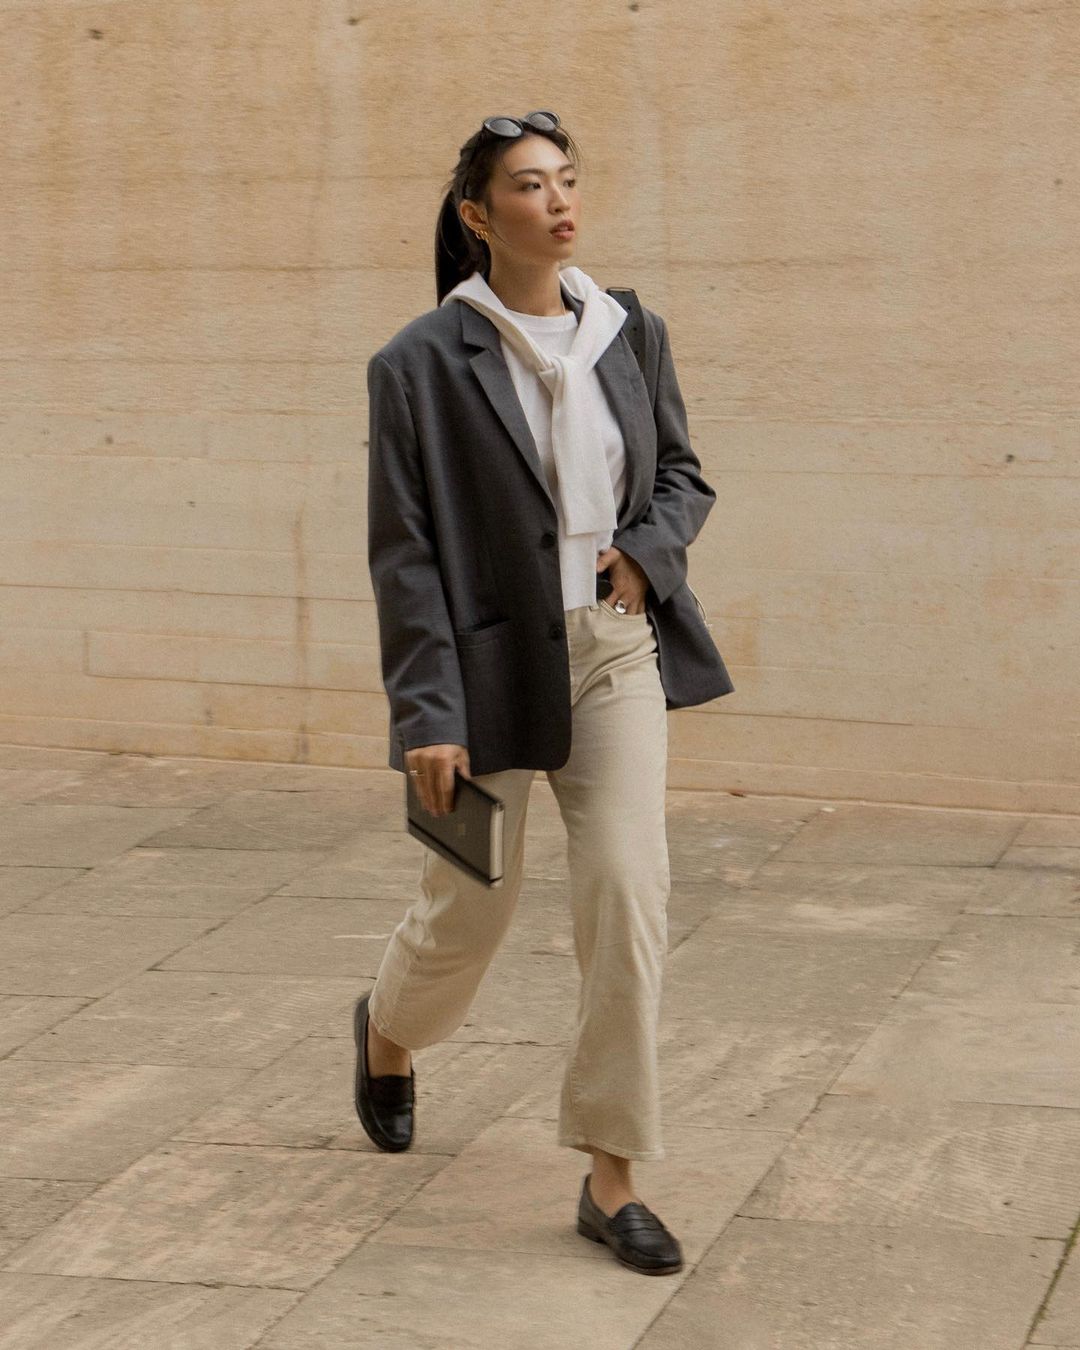 Shoes for Work: @michellelin.lin wears a pair of minimal black loafers with beige trousers